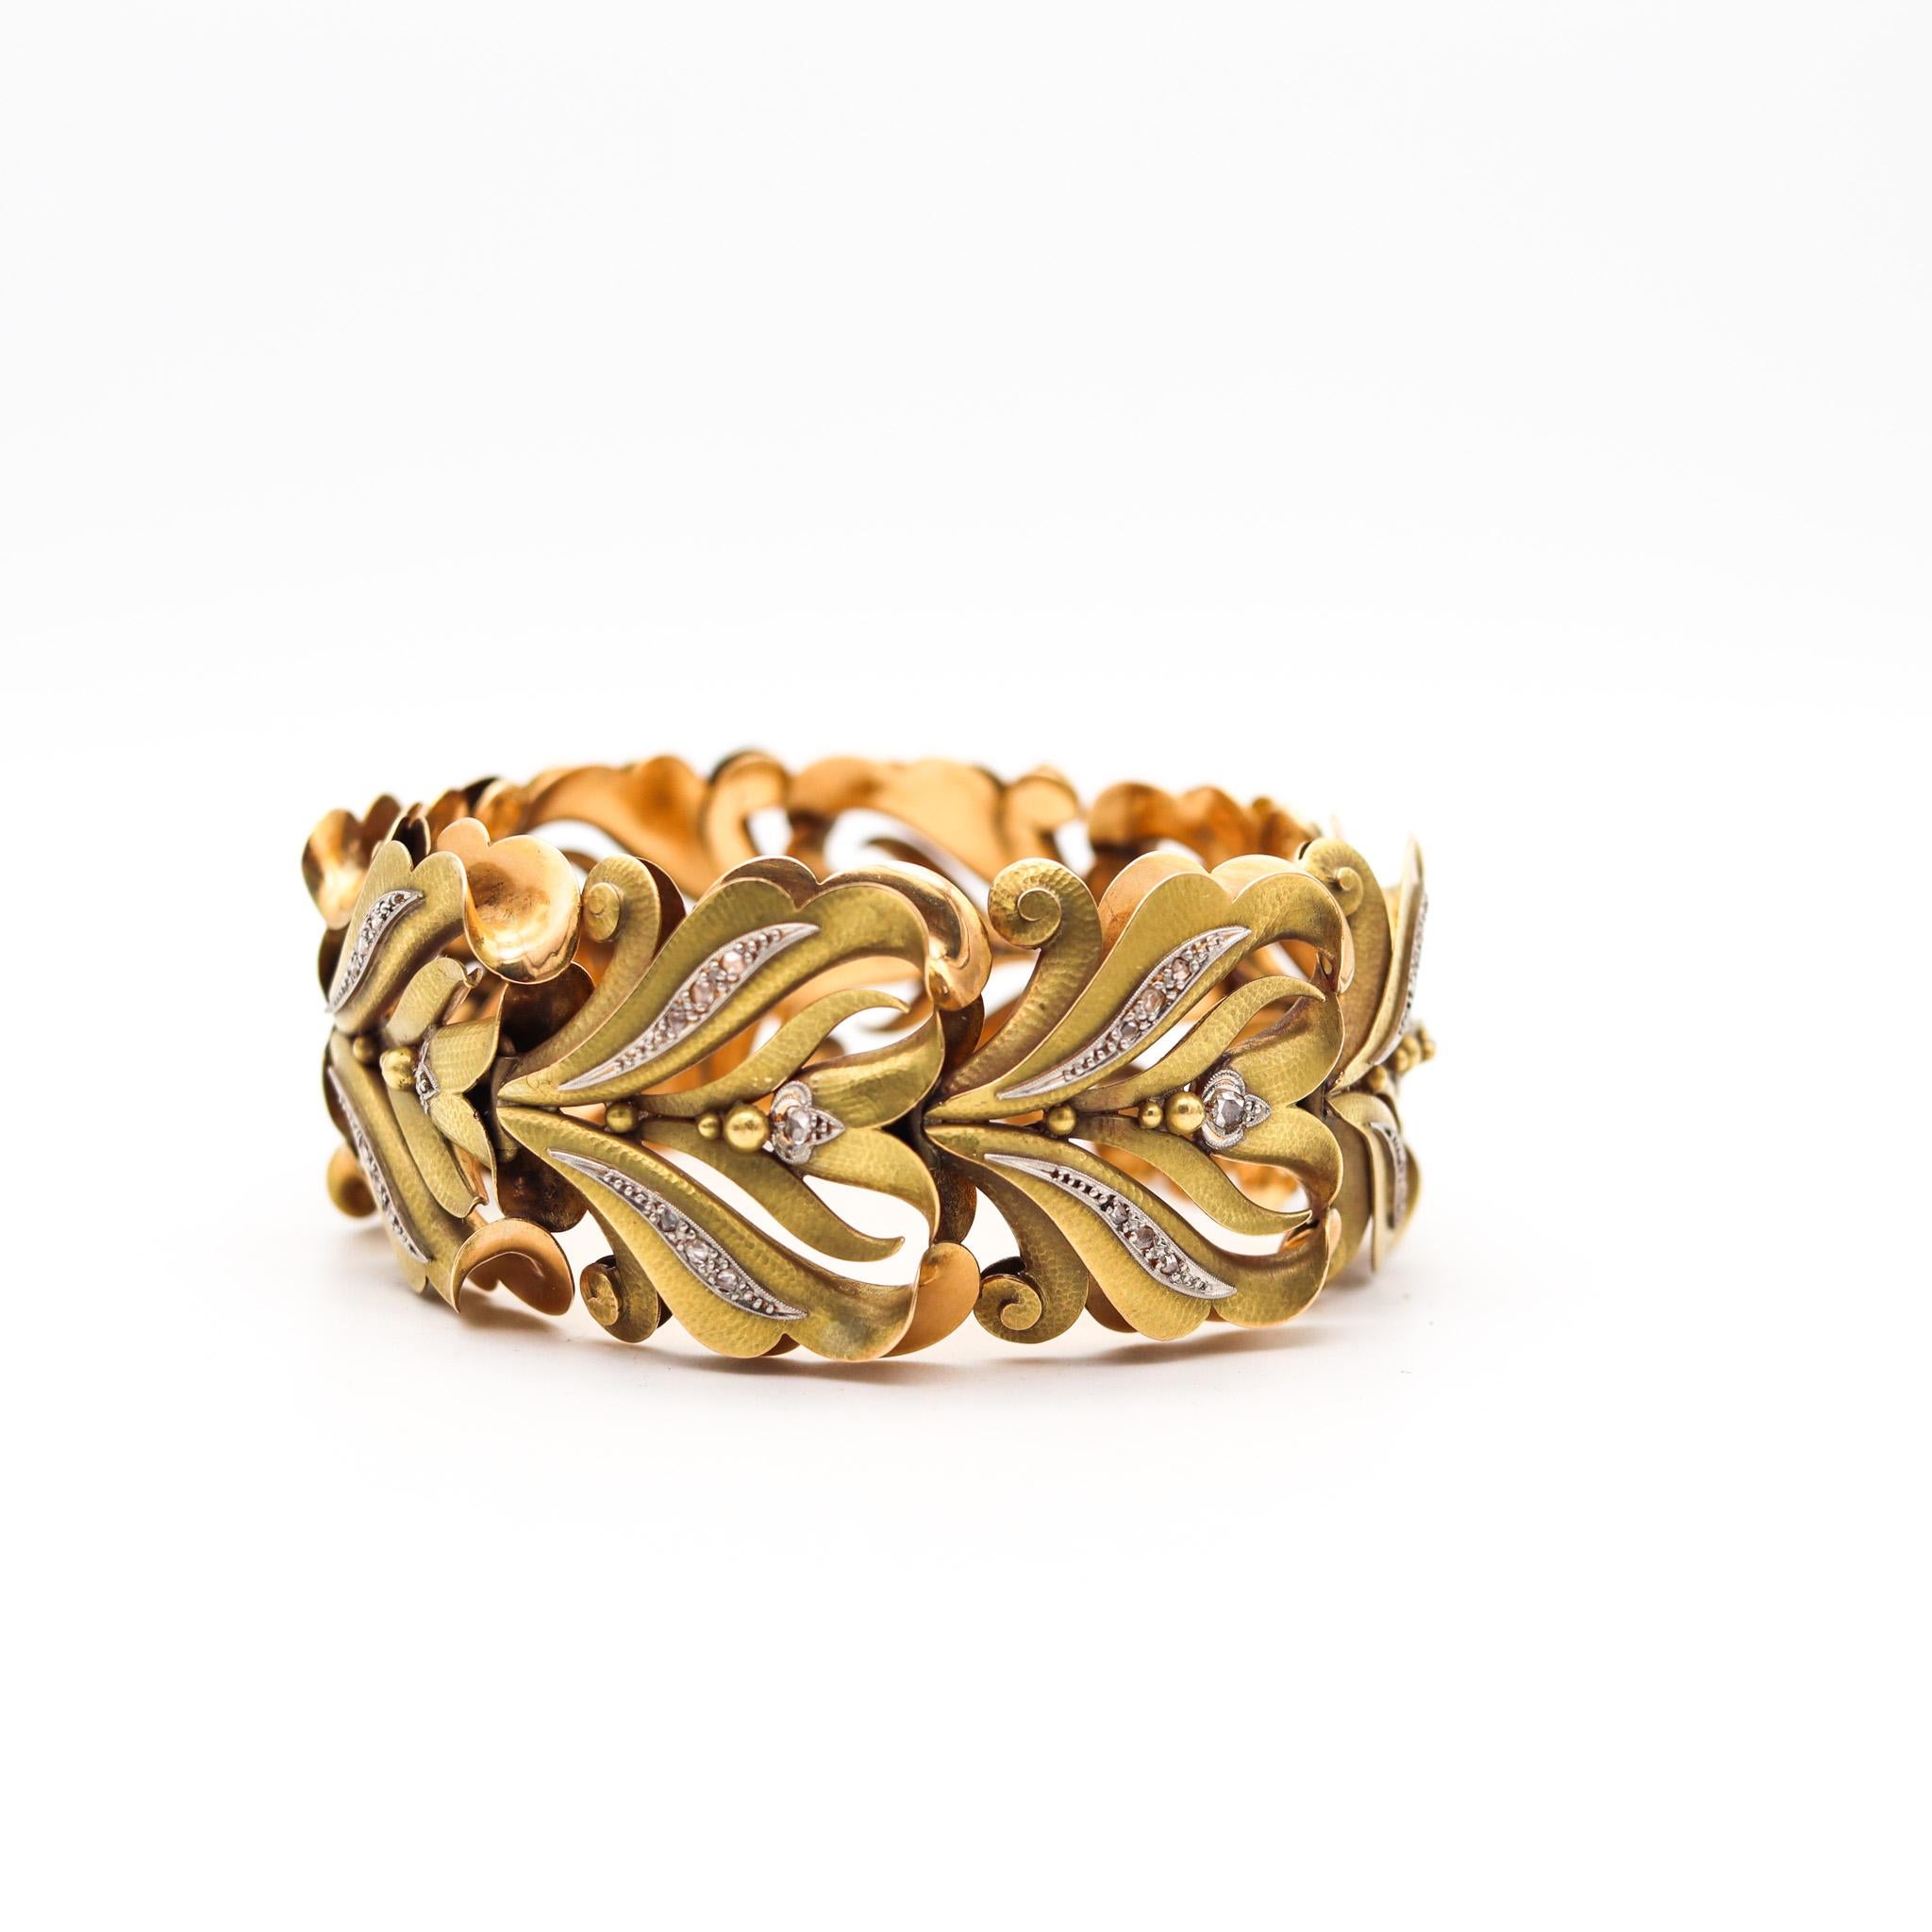 Liberty style bracelet attributed to Calderoni

A fabulous Liberty style antique bracelet, created in Milano Italy during the art Nouveau period, back in the turn of the 19th century, circa 1900. The bracelet itself is a majestic piece of art,